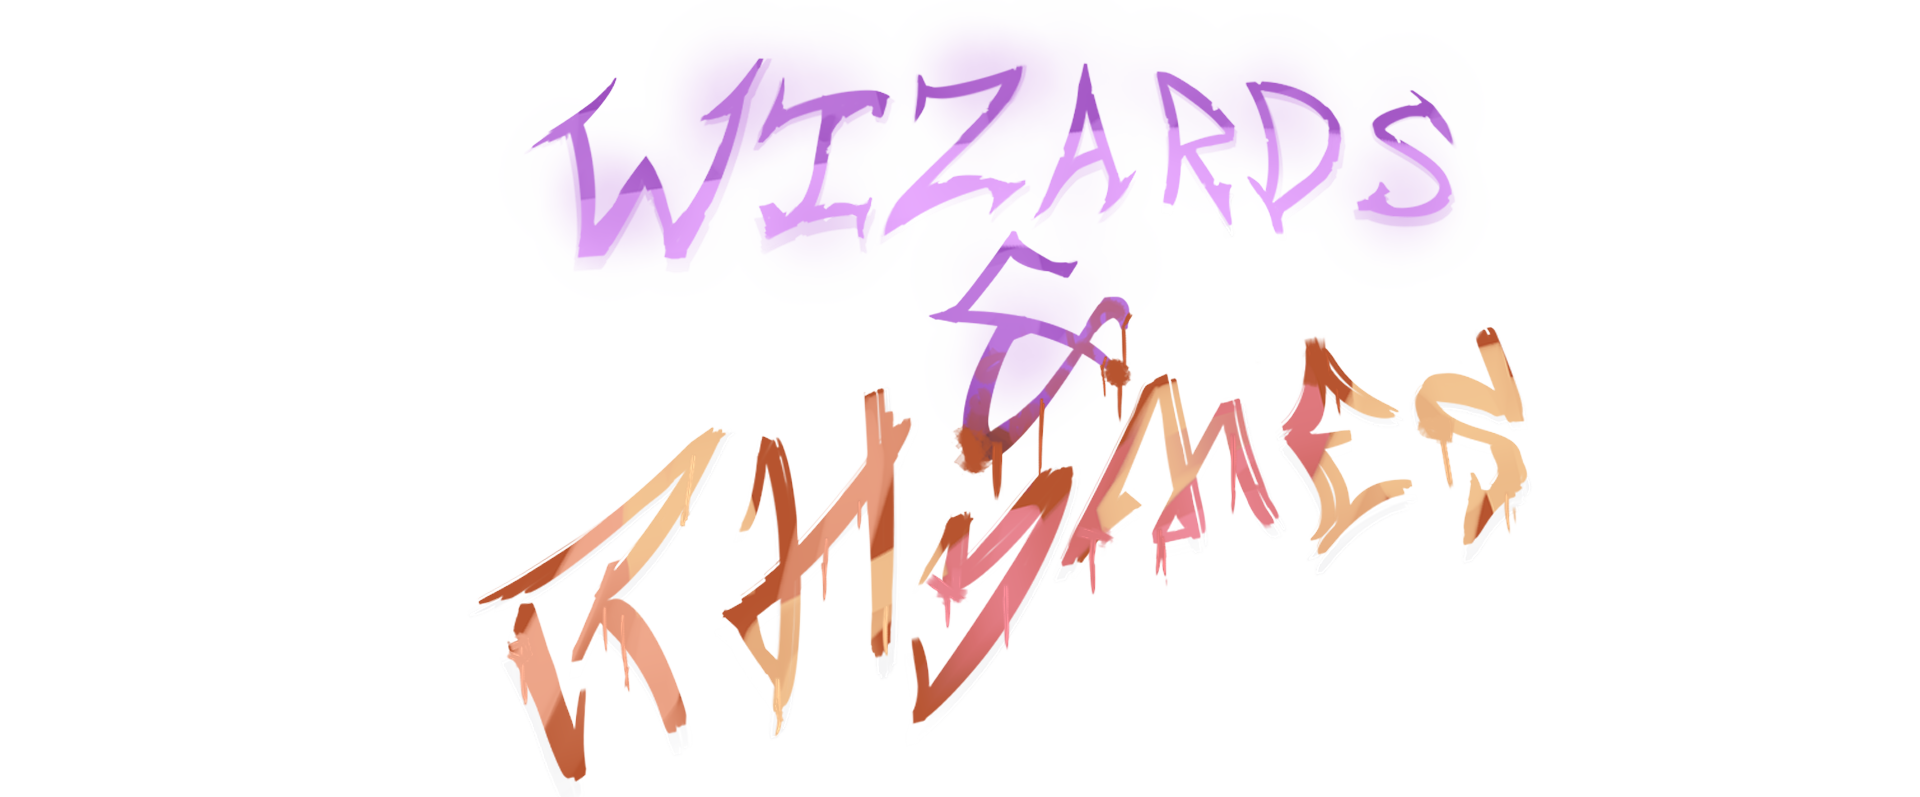 Wizards and Rhymes